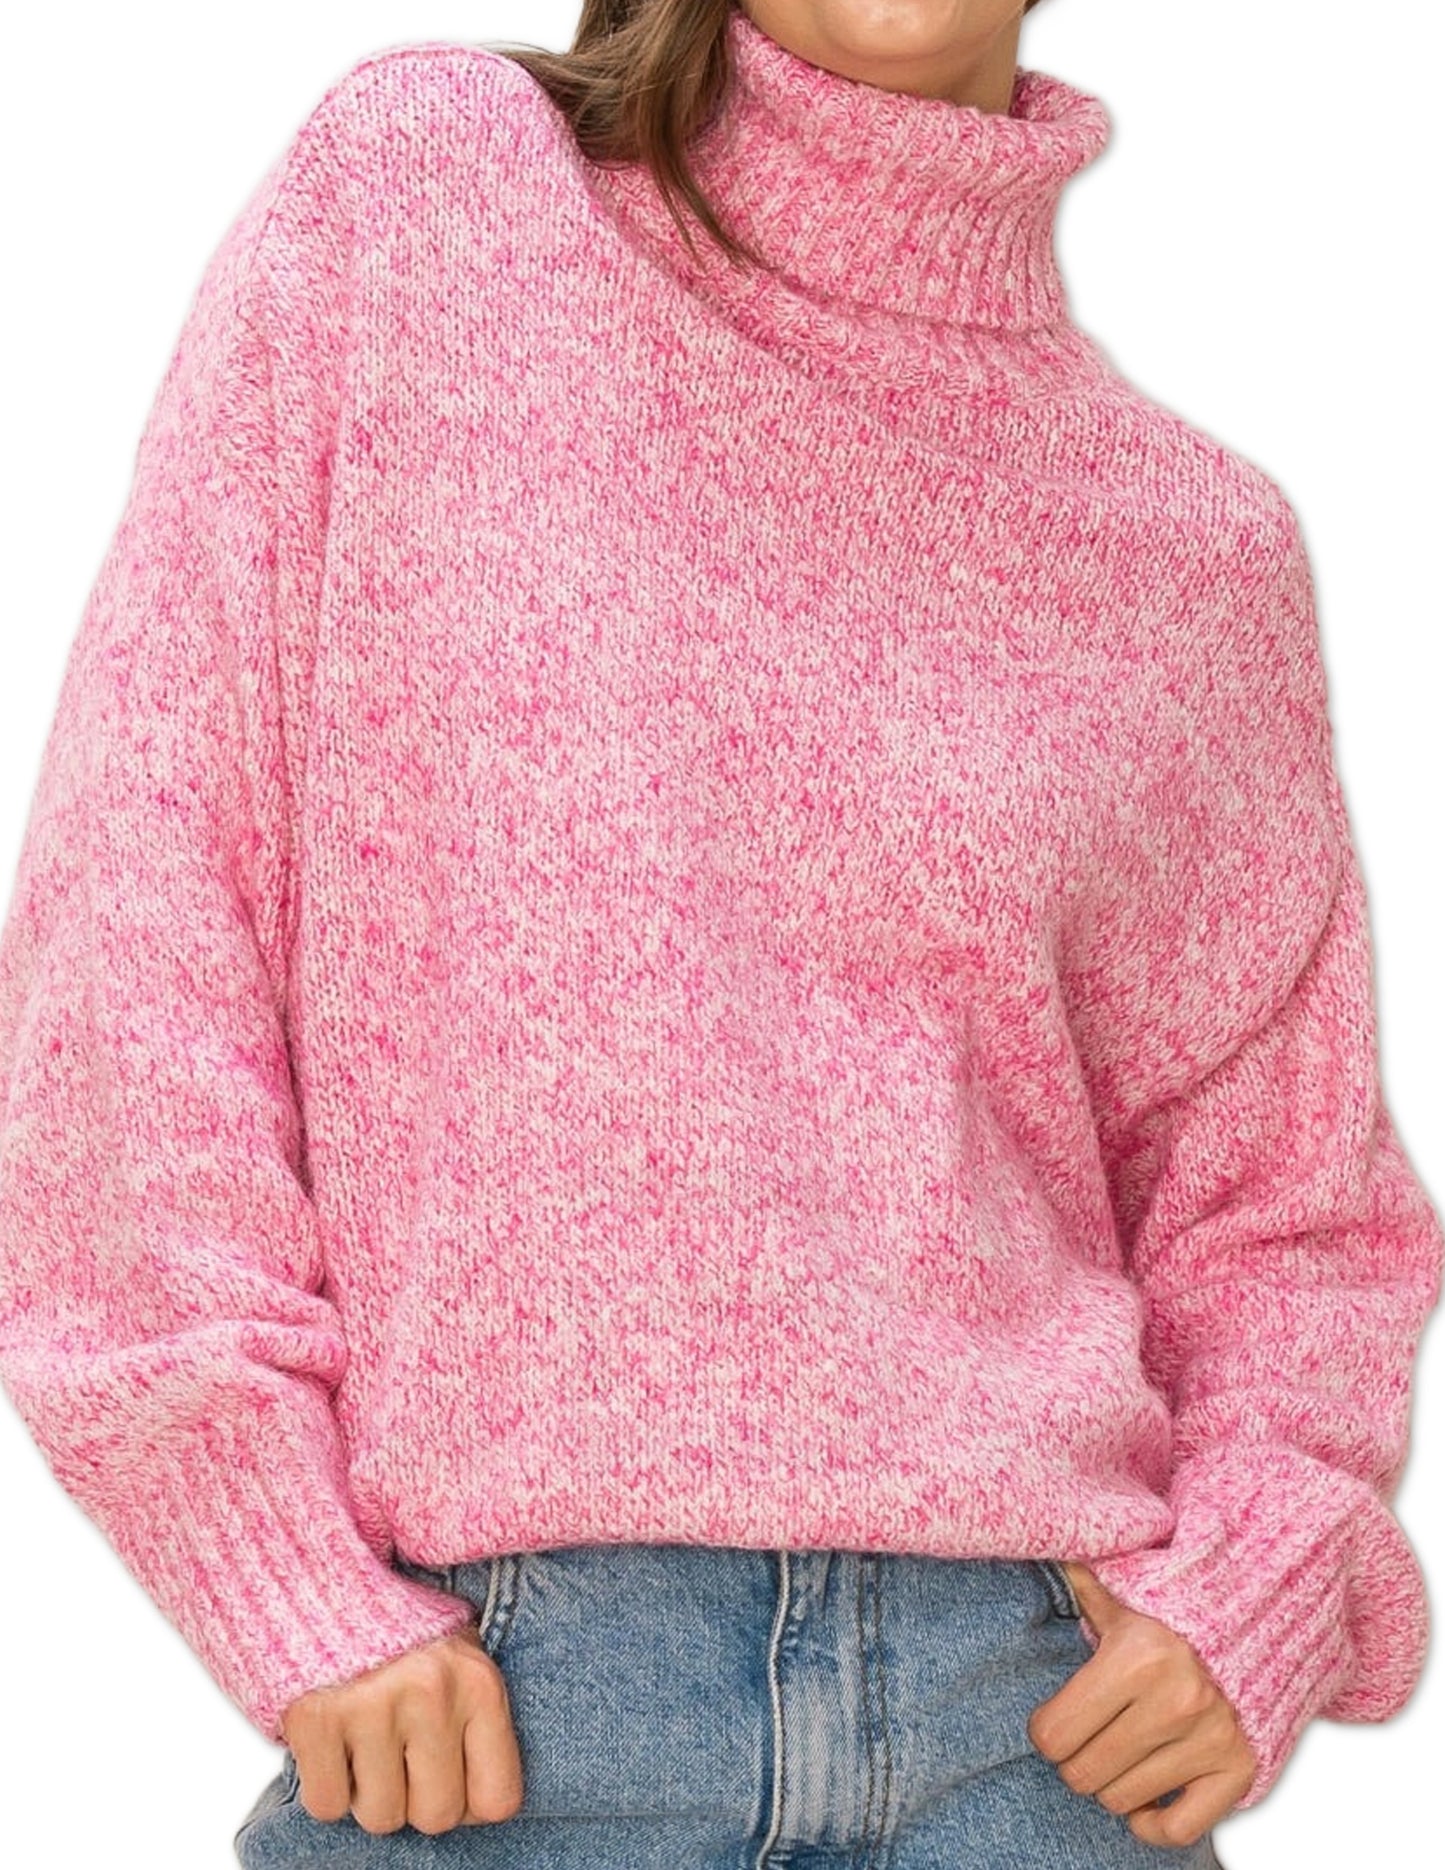 Casual Turtle Neck Pullover Sweater - Hot Pink